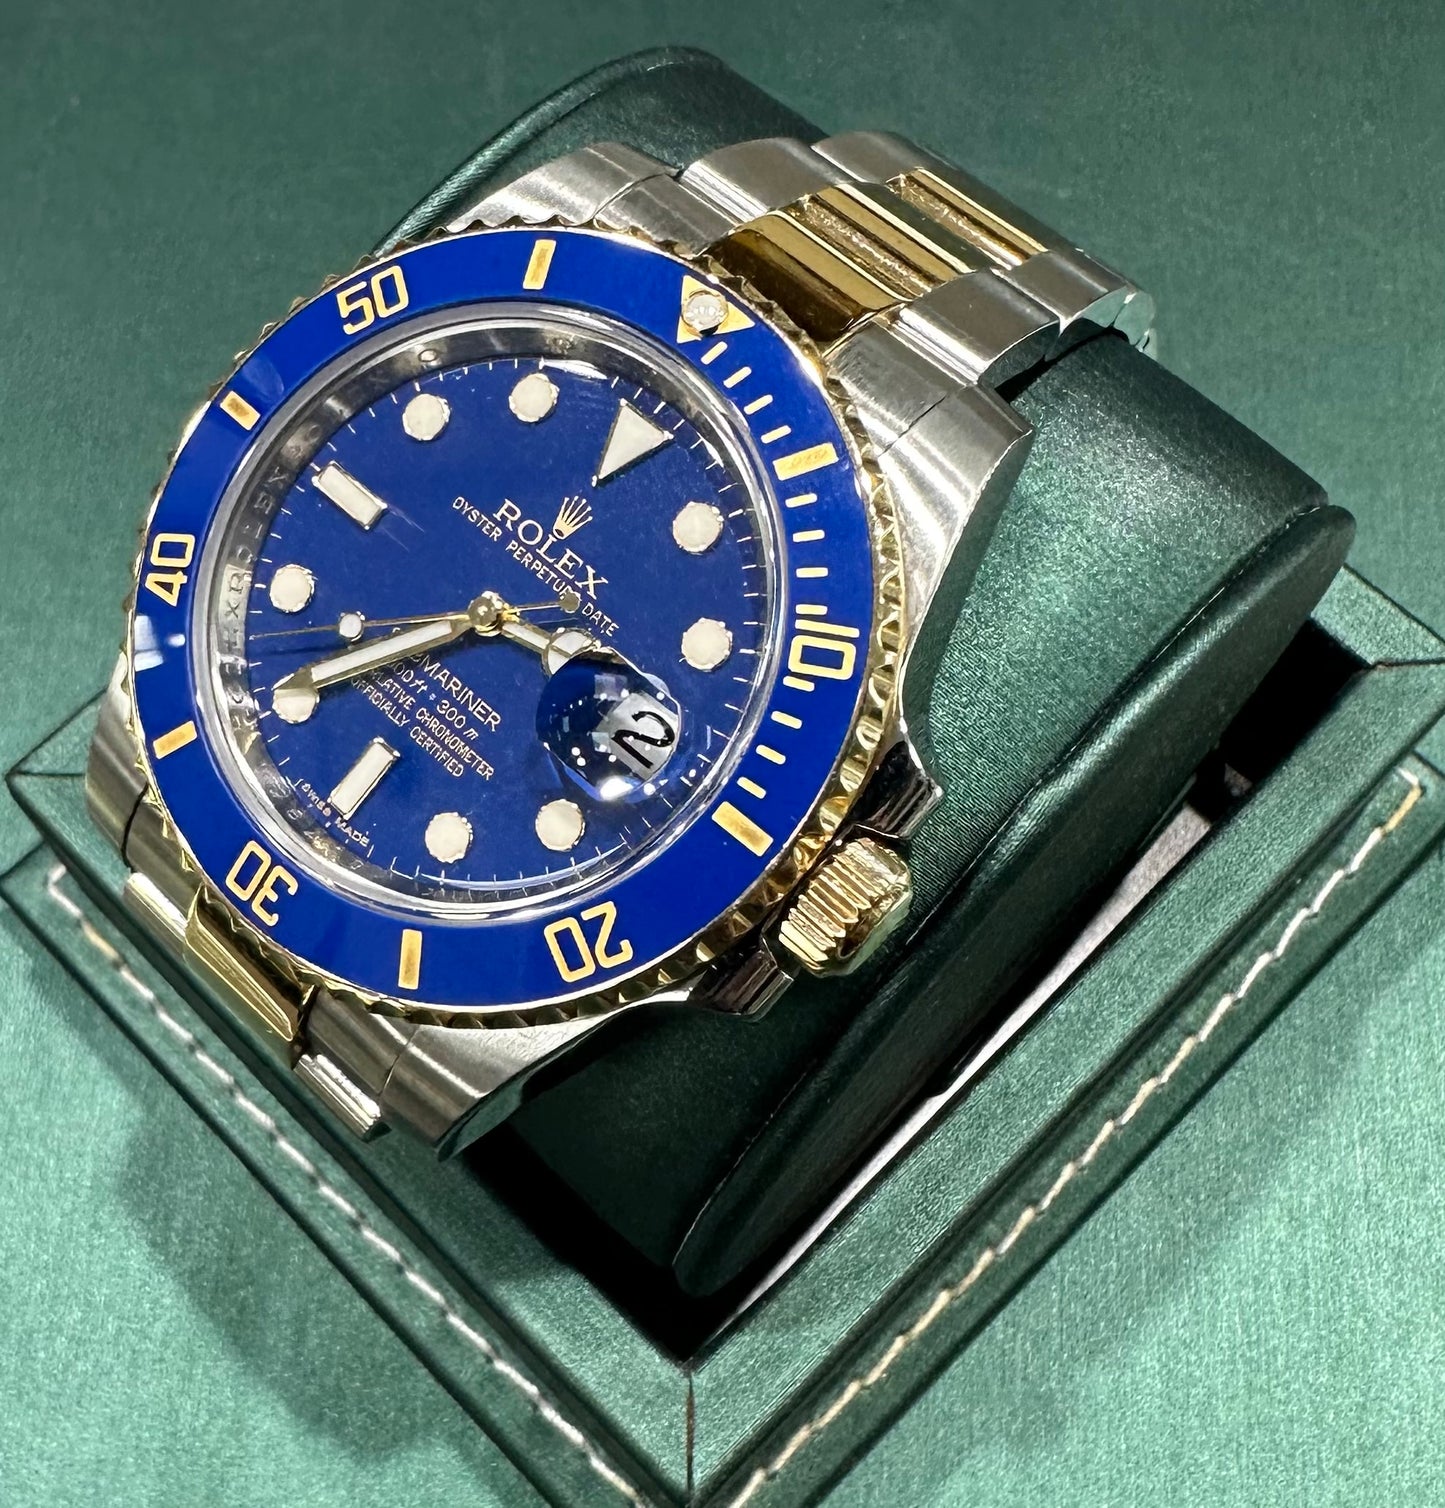 Rolex Submariner Two tone Blue dial 116613LB